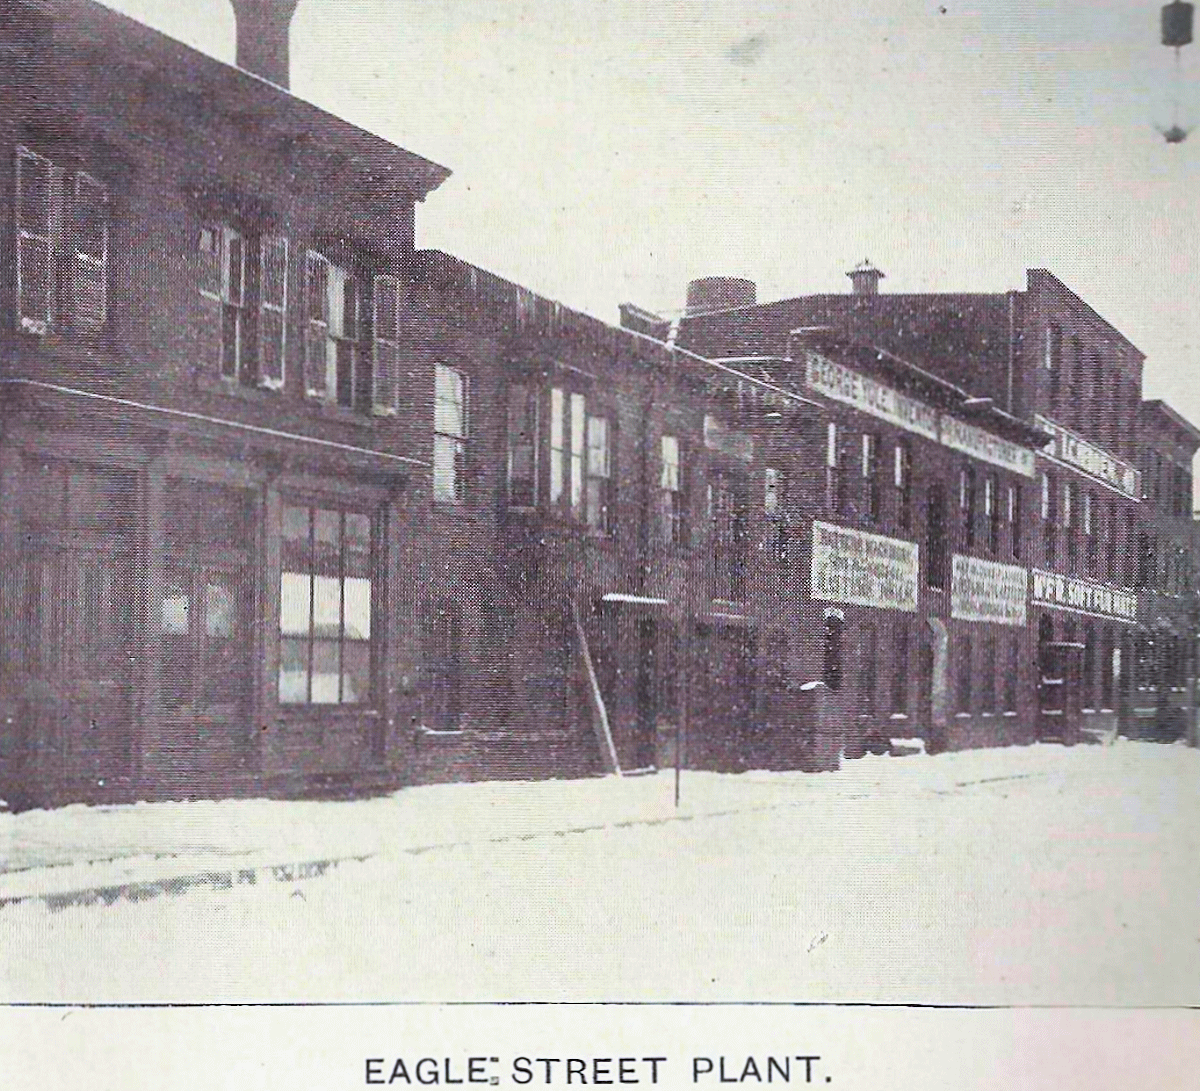 28 Eagles Street
From: "Newark, the Metropolis of New Jersey" Published by the Progress Publishing Co. 1901
